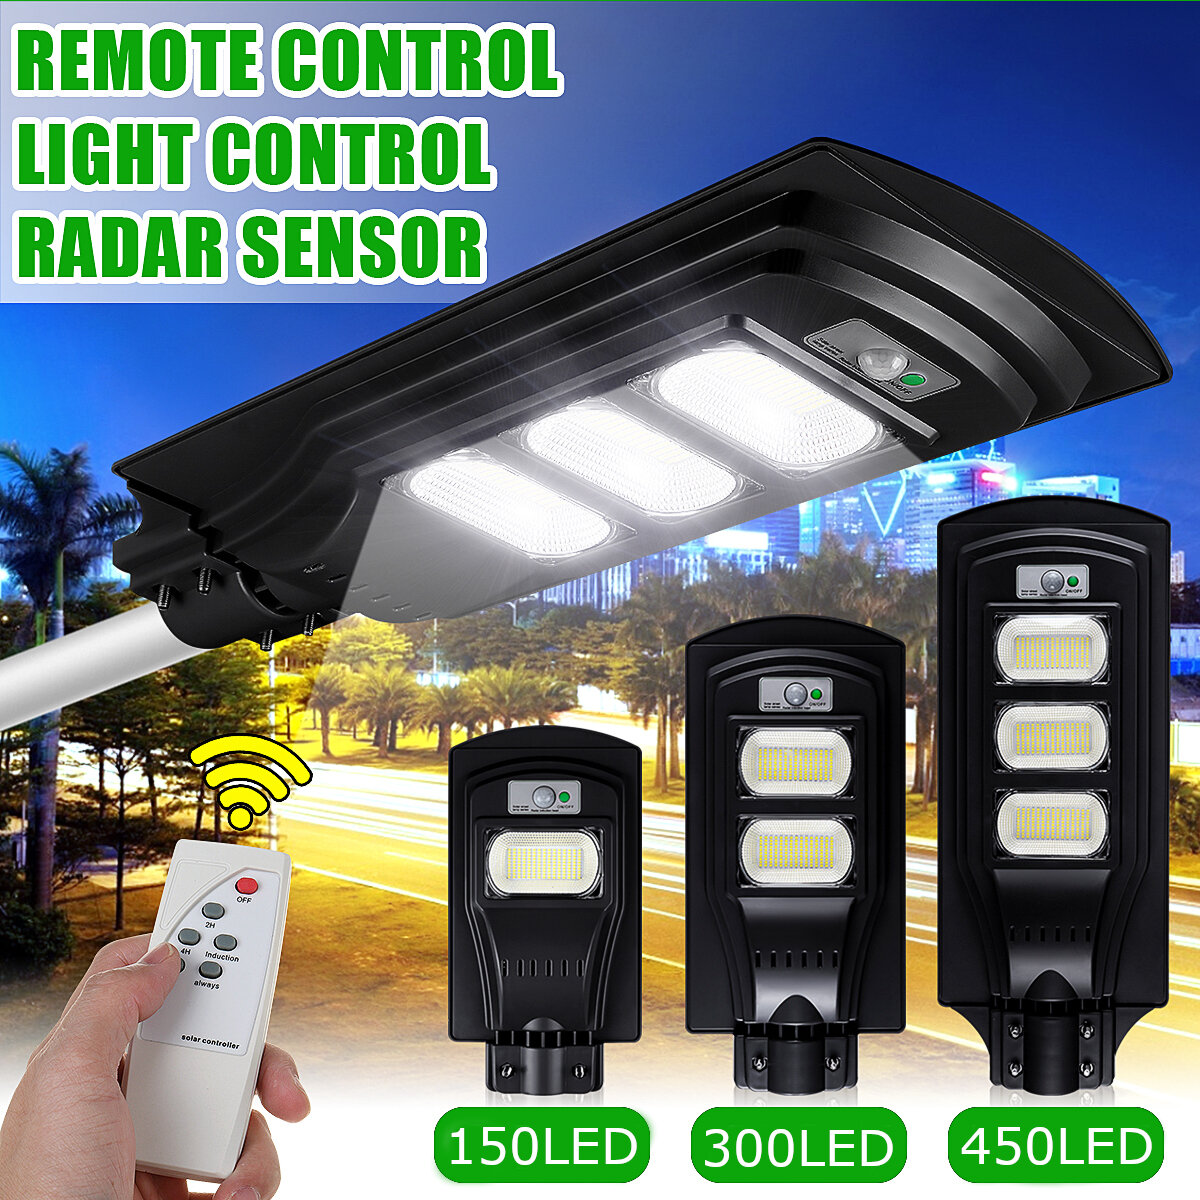 Image of 150/300/450LED Solar Light Sensor Timing Control+Light Control Garden Yard Street Lamp with Remote Control